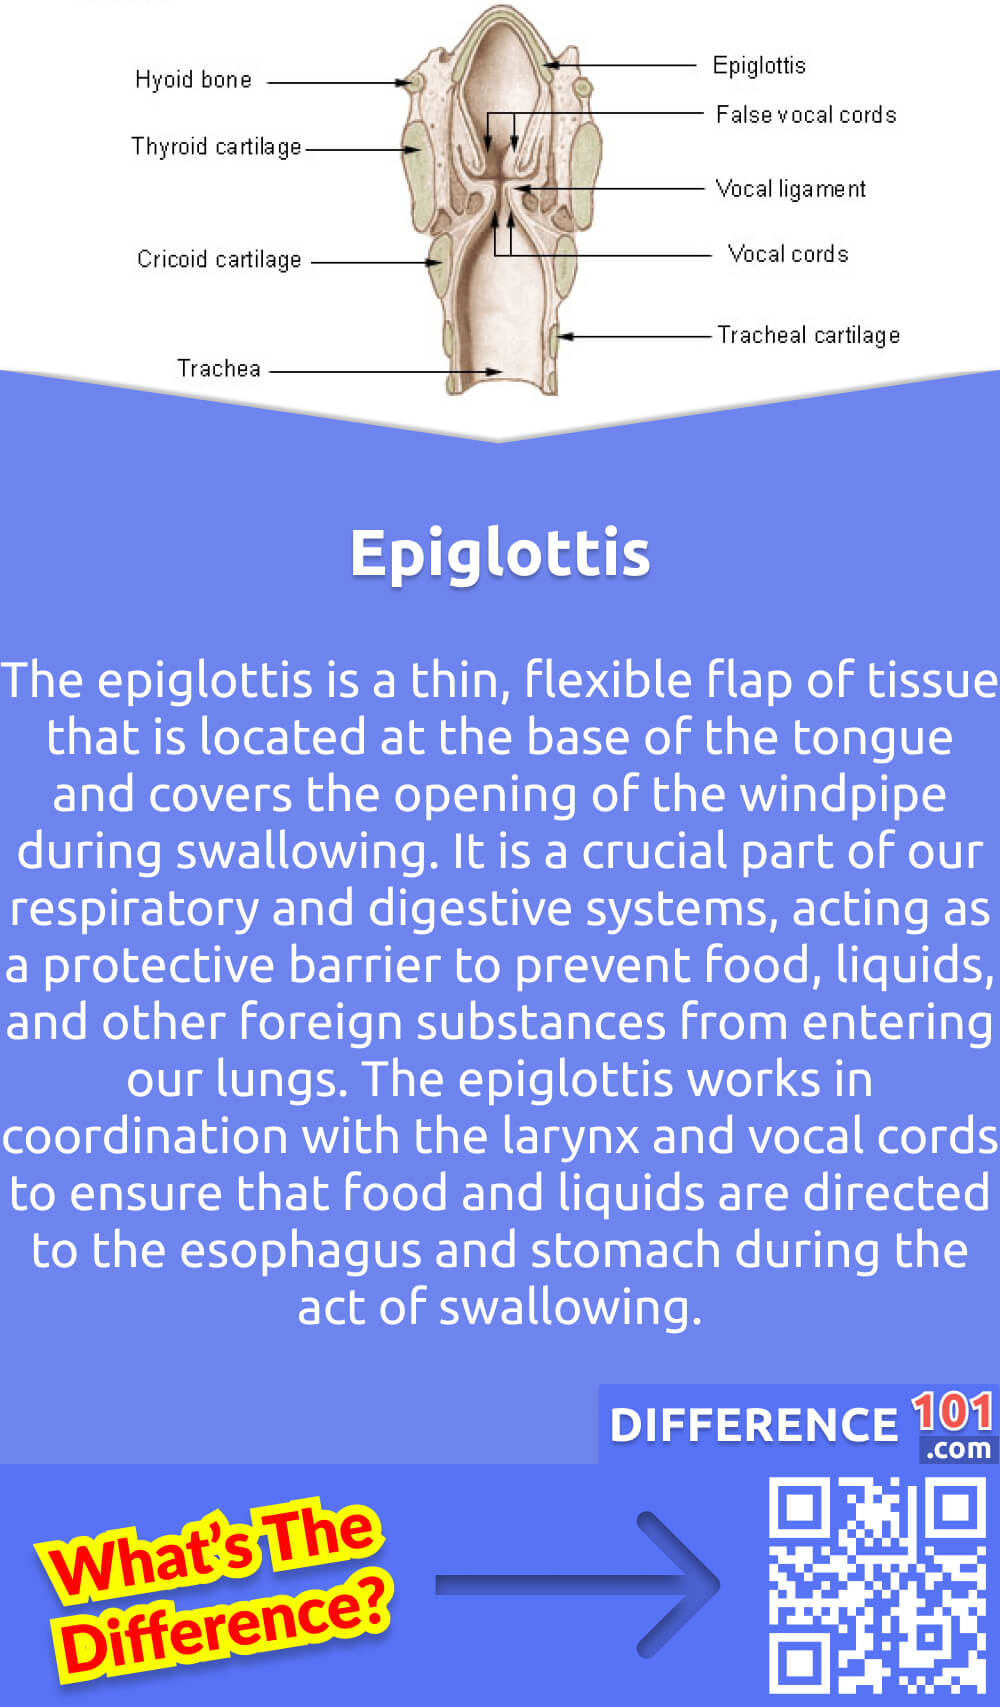 What Is Epiglottis? The epiglottis is a thin, flexible flap of tissue that is located at the base of the tongue and covers the opening of the windpipe during swallowing. It is a crucial part of our respiratory and digestive systems, acting as a protective barrier to prevent food, liquids, and other foreign substances from entering our lungs. The epiglottis works in coordination with the larynx and vocal cords to ensure that food and liquids are directed to the esophagus and stomach during the act of swallowing. Dysfunction of the epiglottis can result in a variety of respiratory and digestive problems, making its proper function essential for optimal health.